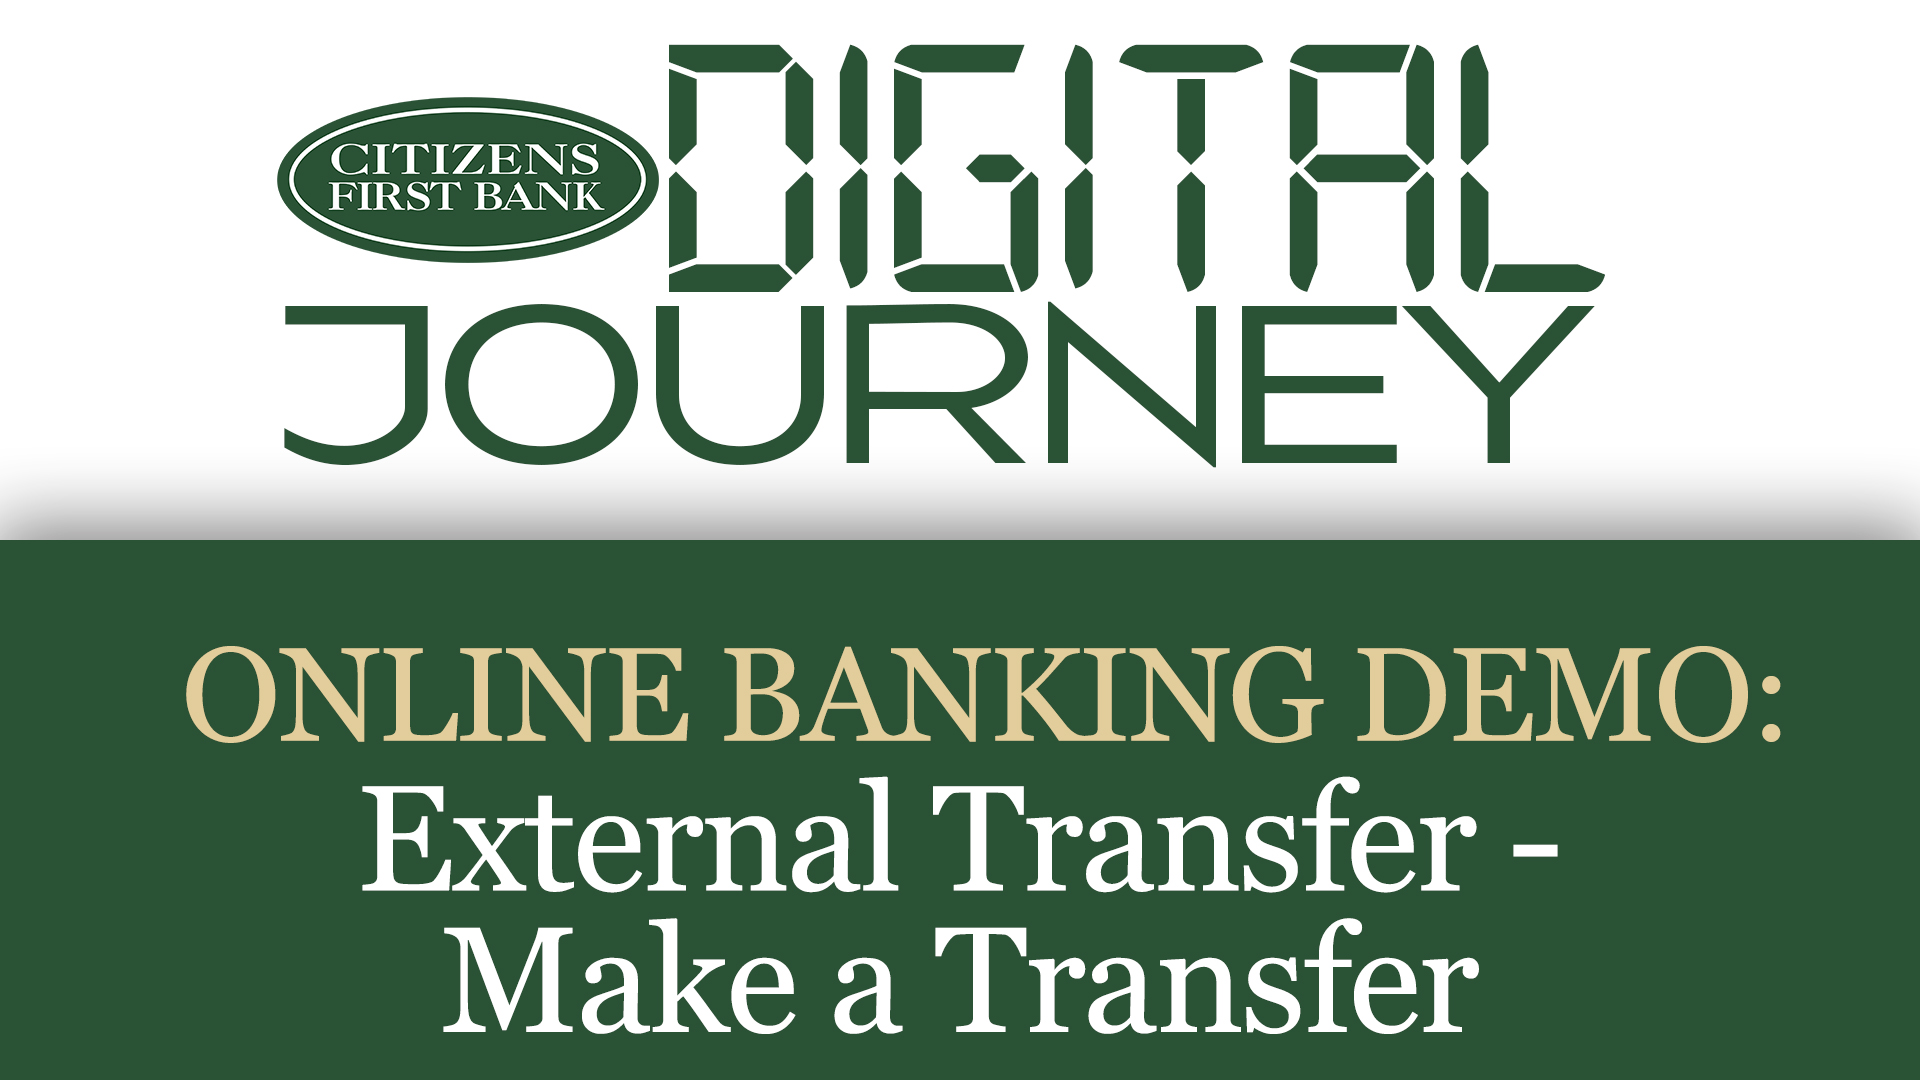 Digital Journey logo with our online banking demo: External Transfer - Make a Transfer